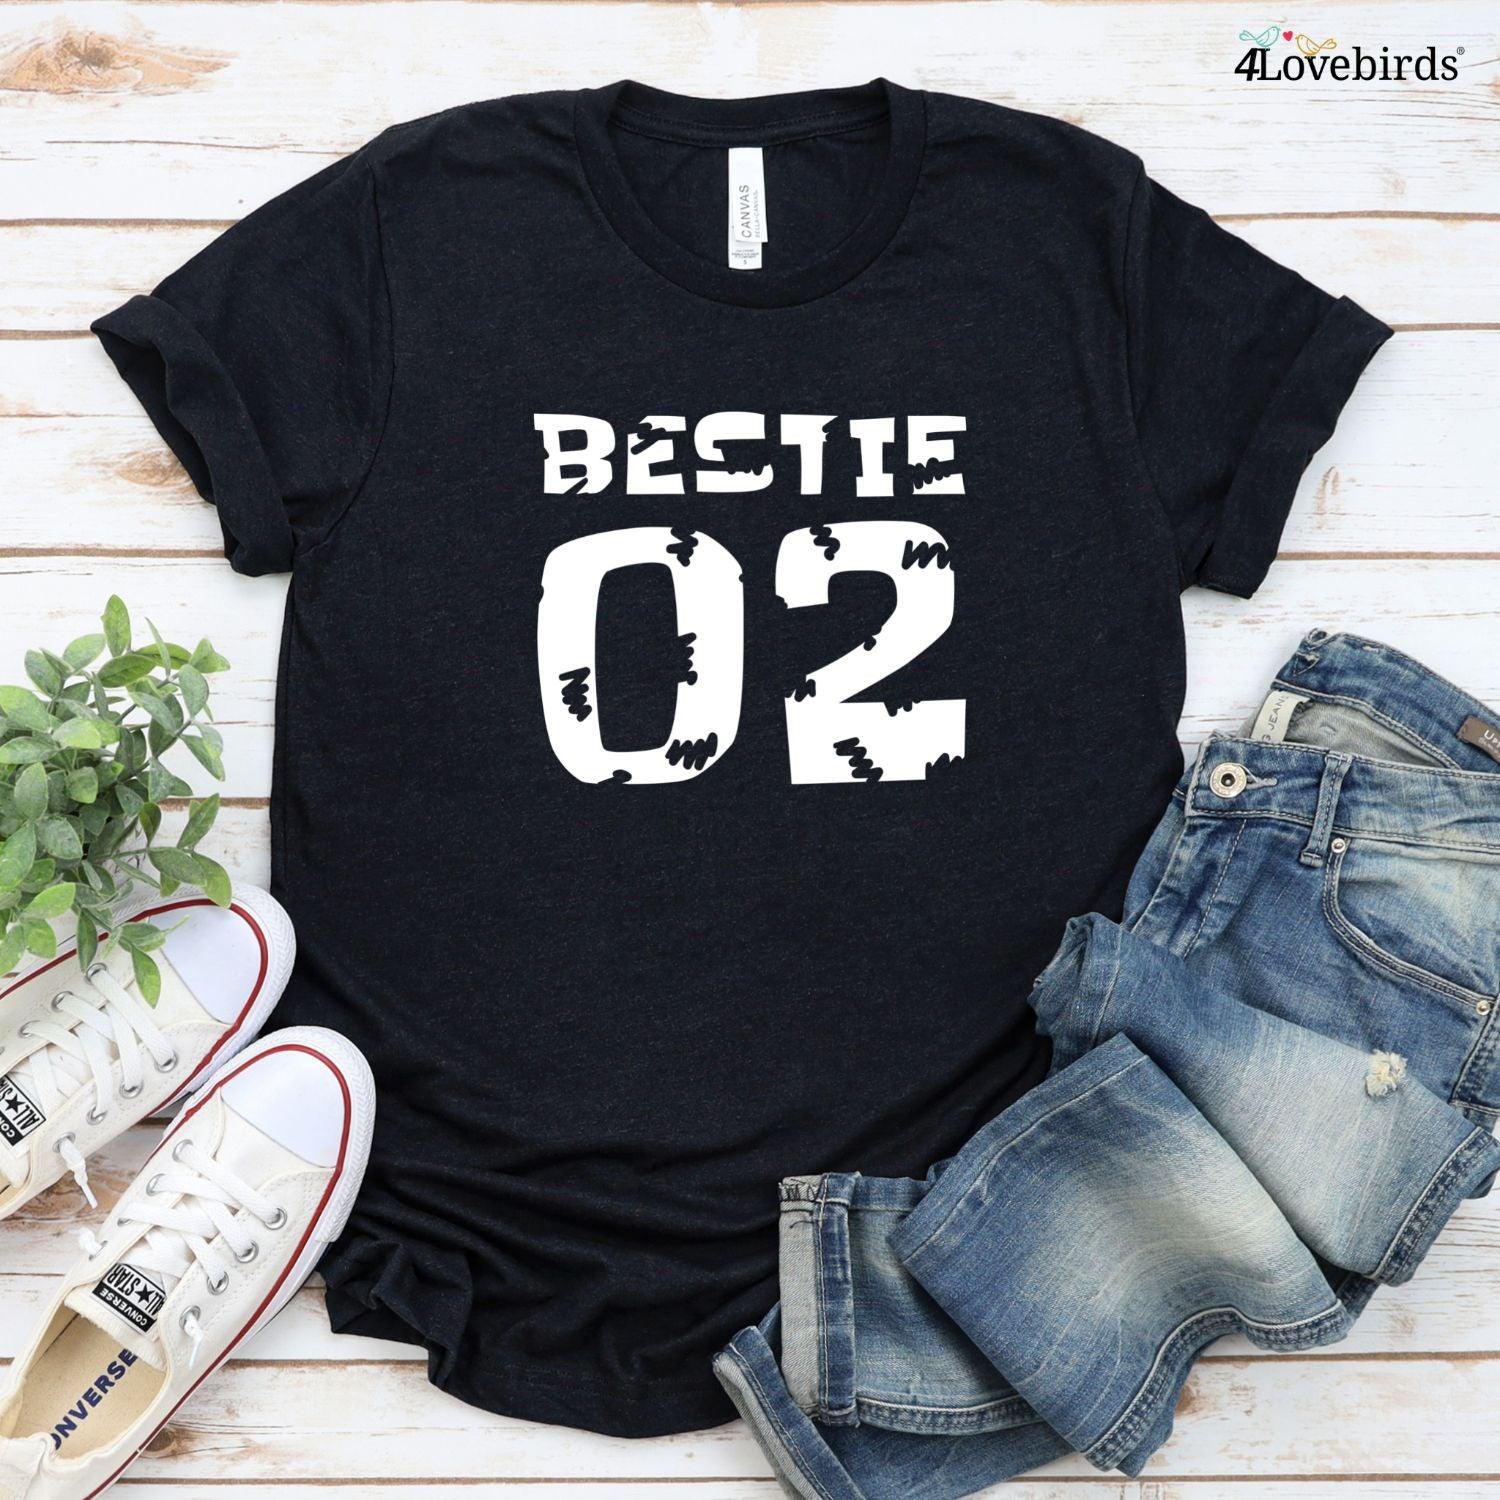 bestie 01 and 02 matching outfits comfy bff sets perfect best friend gifts 4lovebirds 5